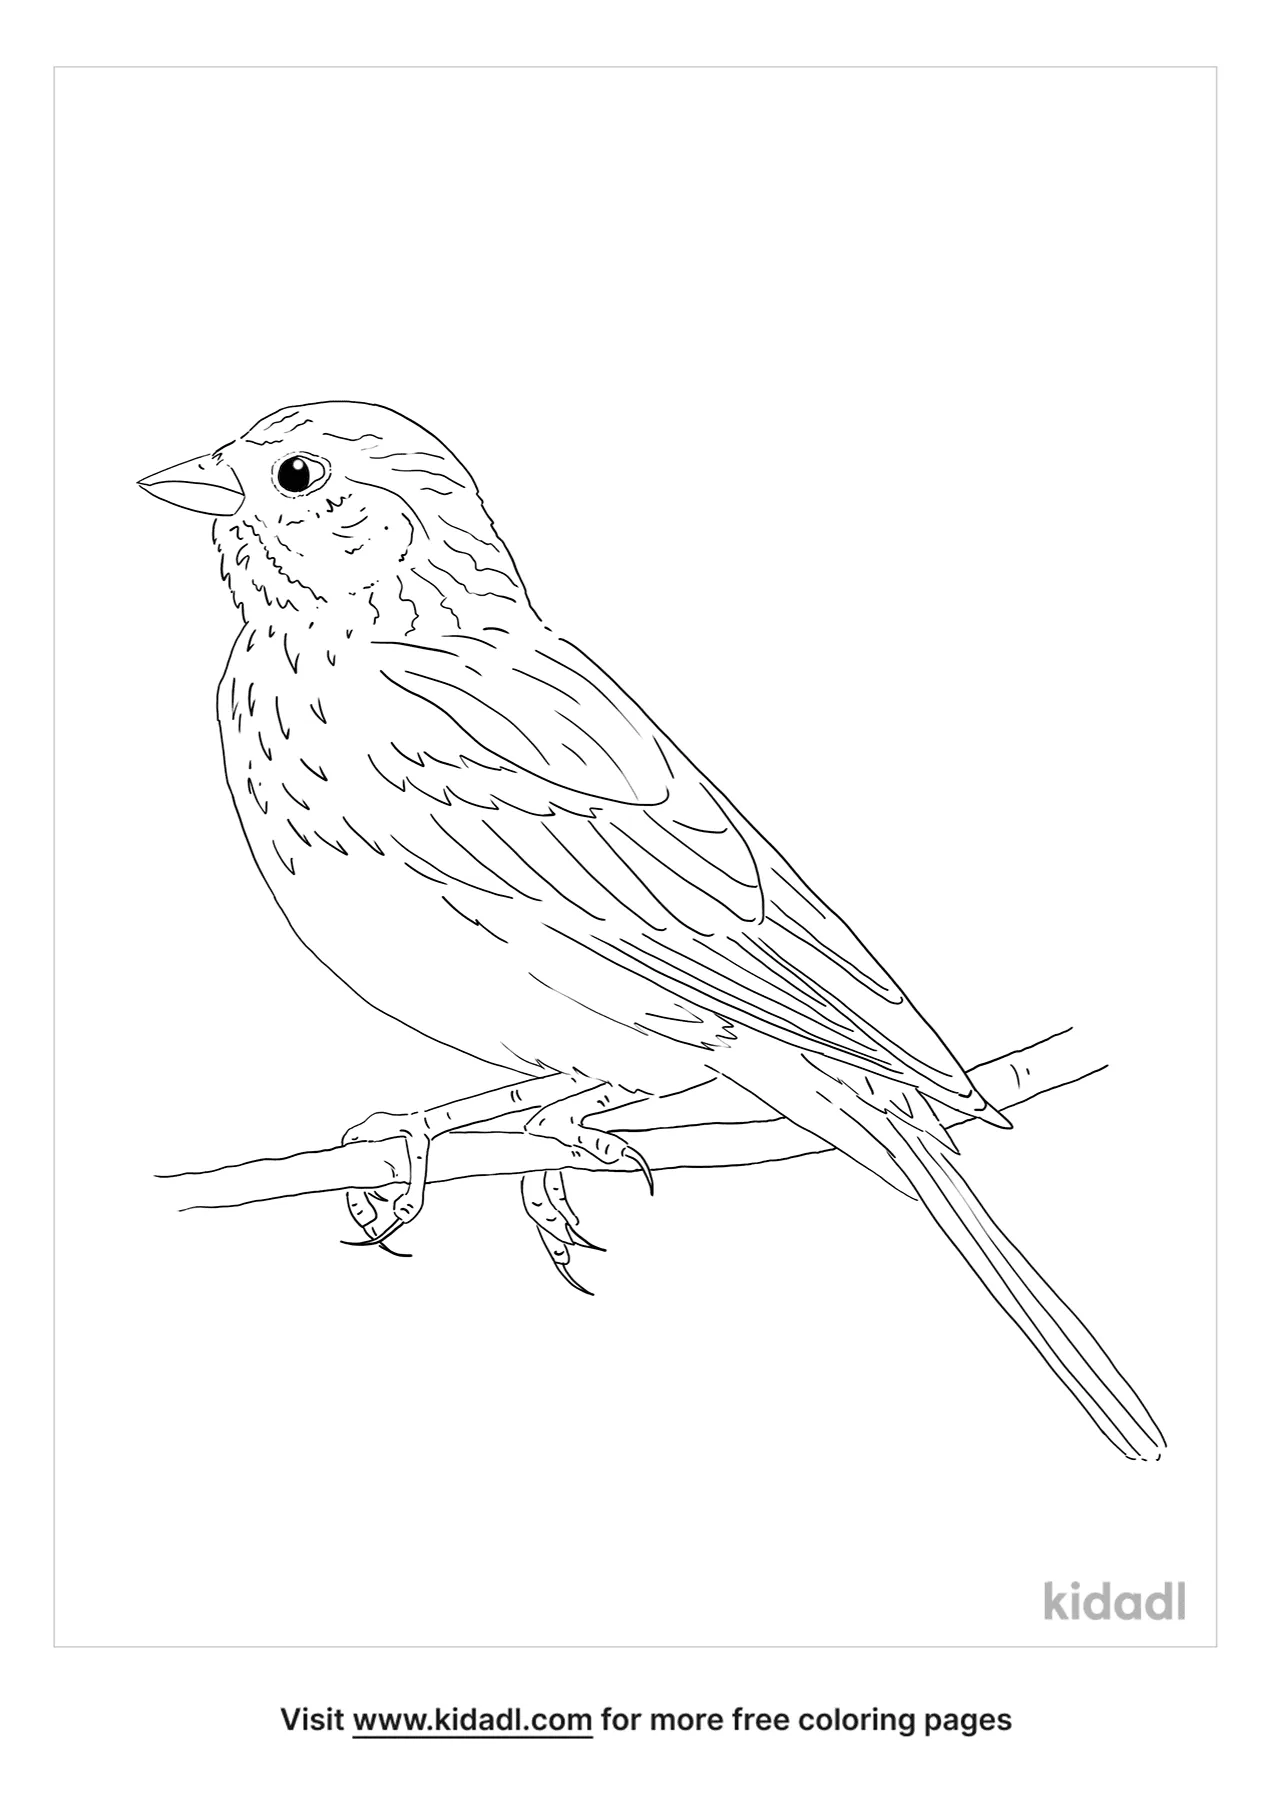 Clay-Colored Sparrow Coloring Page